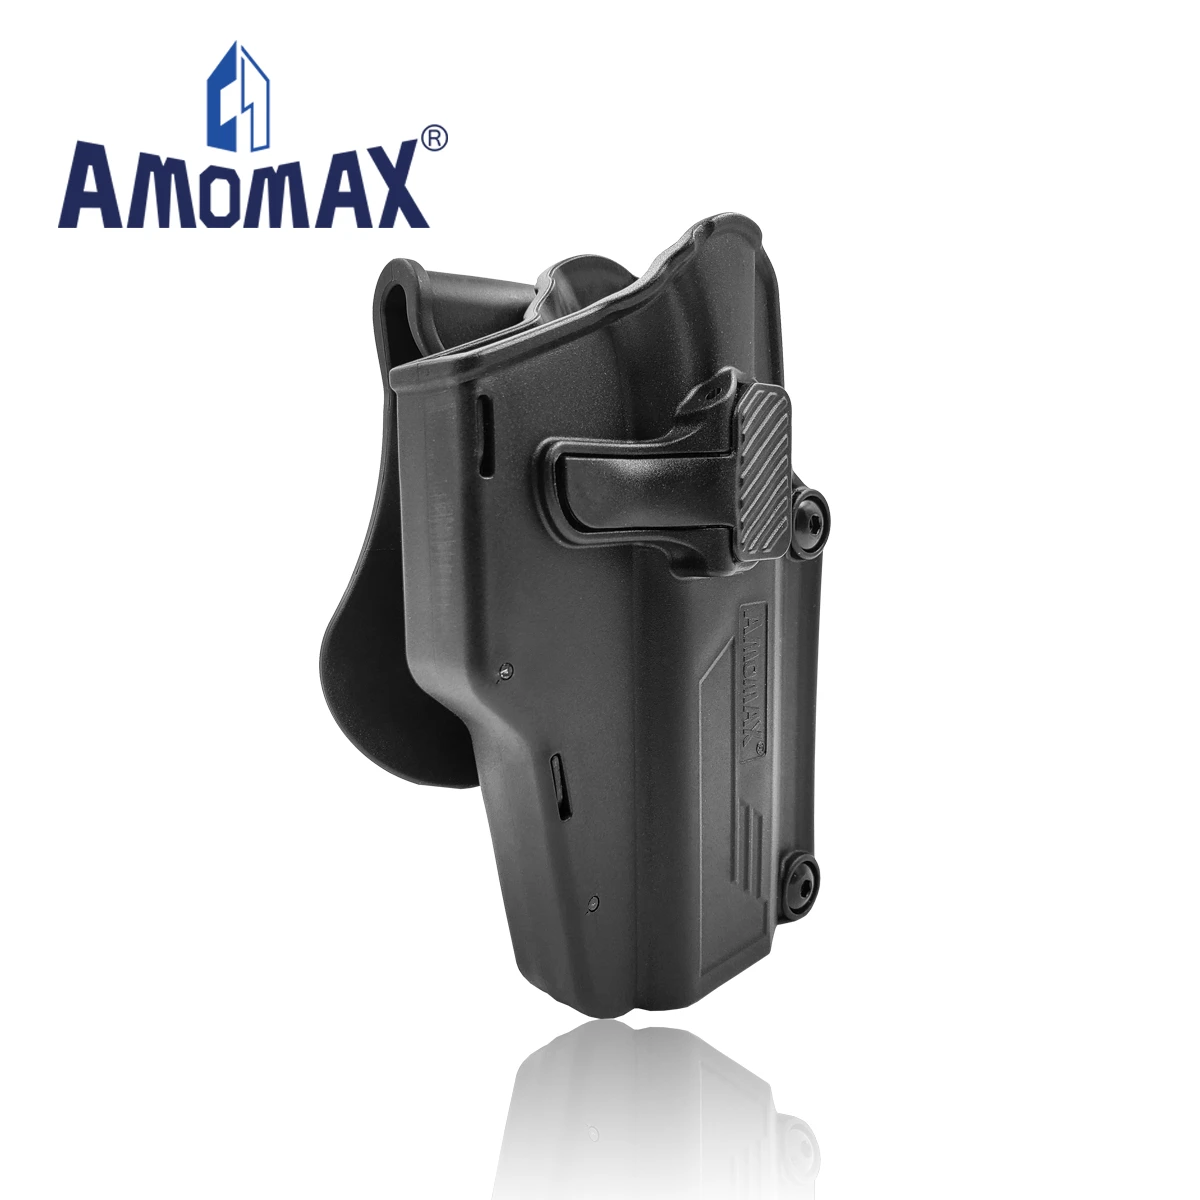 Amomax Tactical Plastic General Multi-fit Per-fit Universal Tactical Hand Gun Belly Band Holsters for 200 more guns